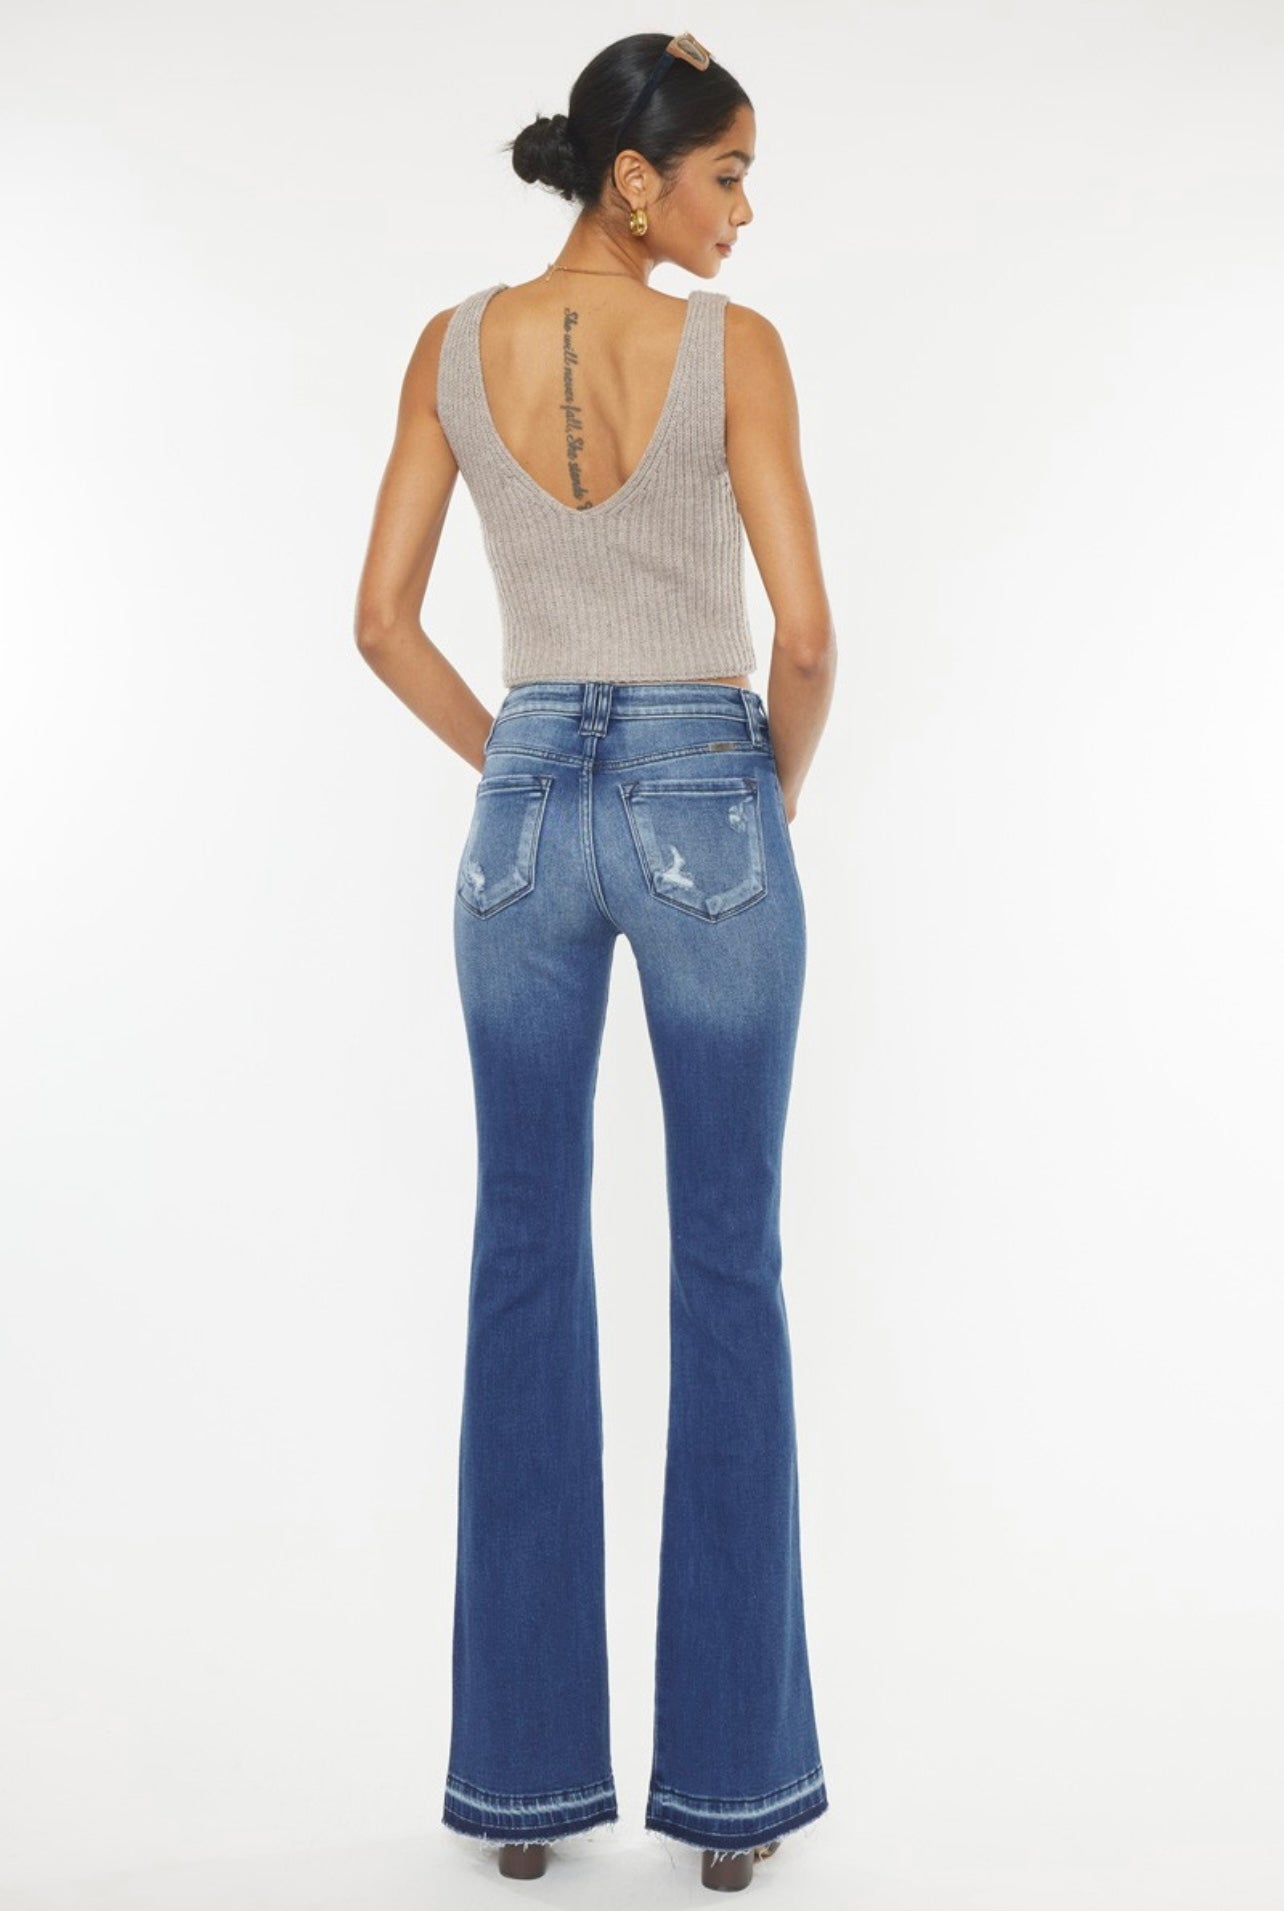 The Jackson High Rise Boot Cut Jeans